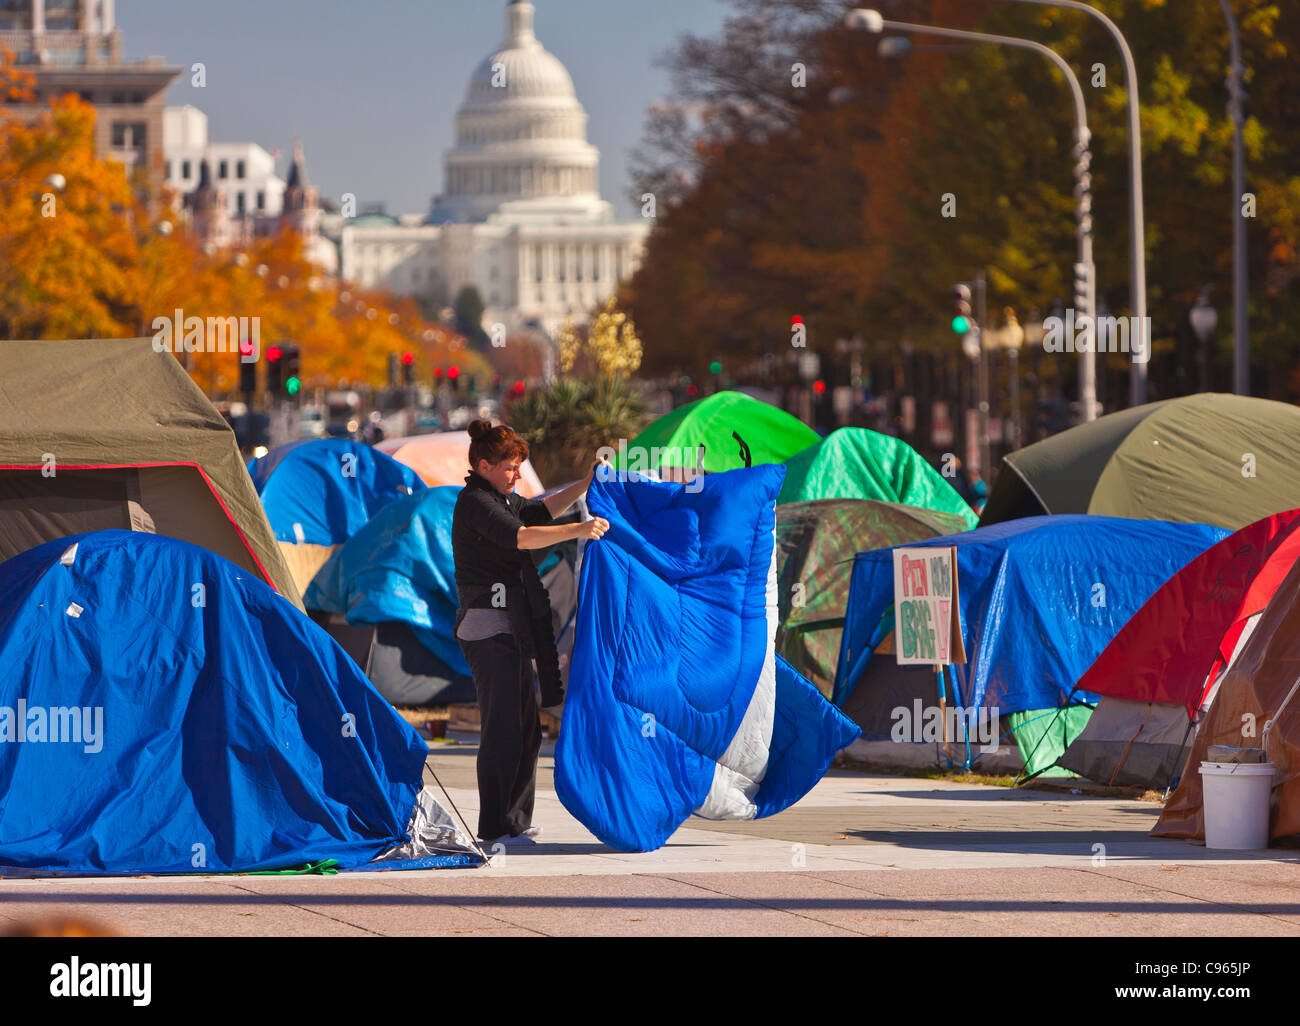 WASHINGTON, DC USA - Occupy Washington protest camp at Freedom Plaza and U.S. Capitol dome in distance. Stock Photo